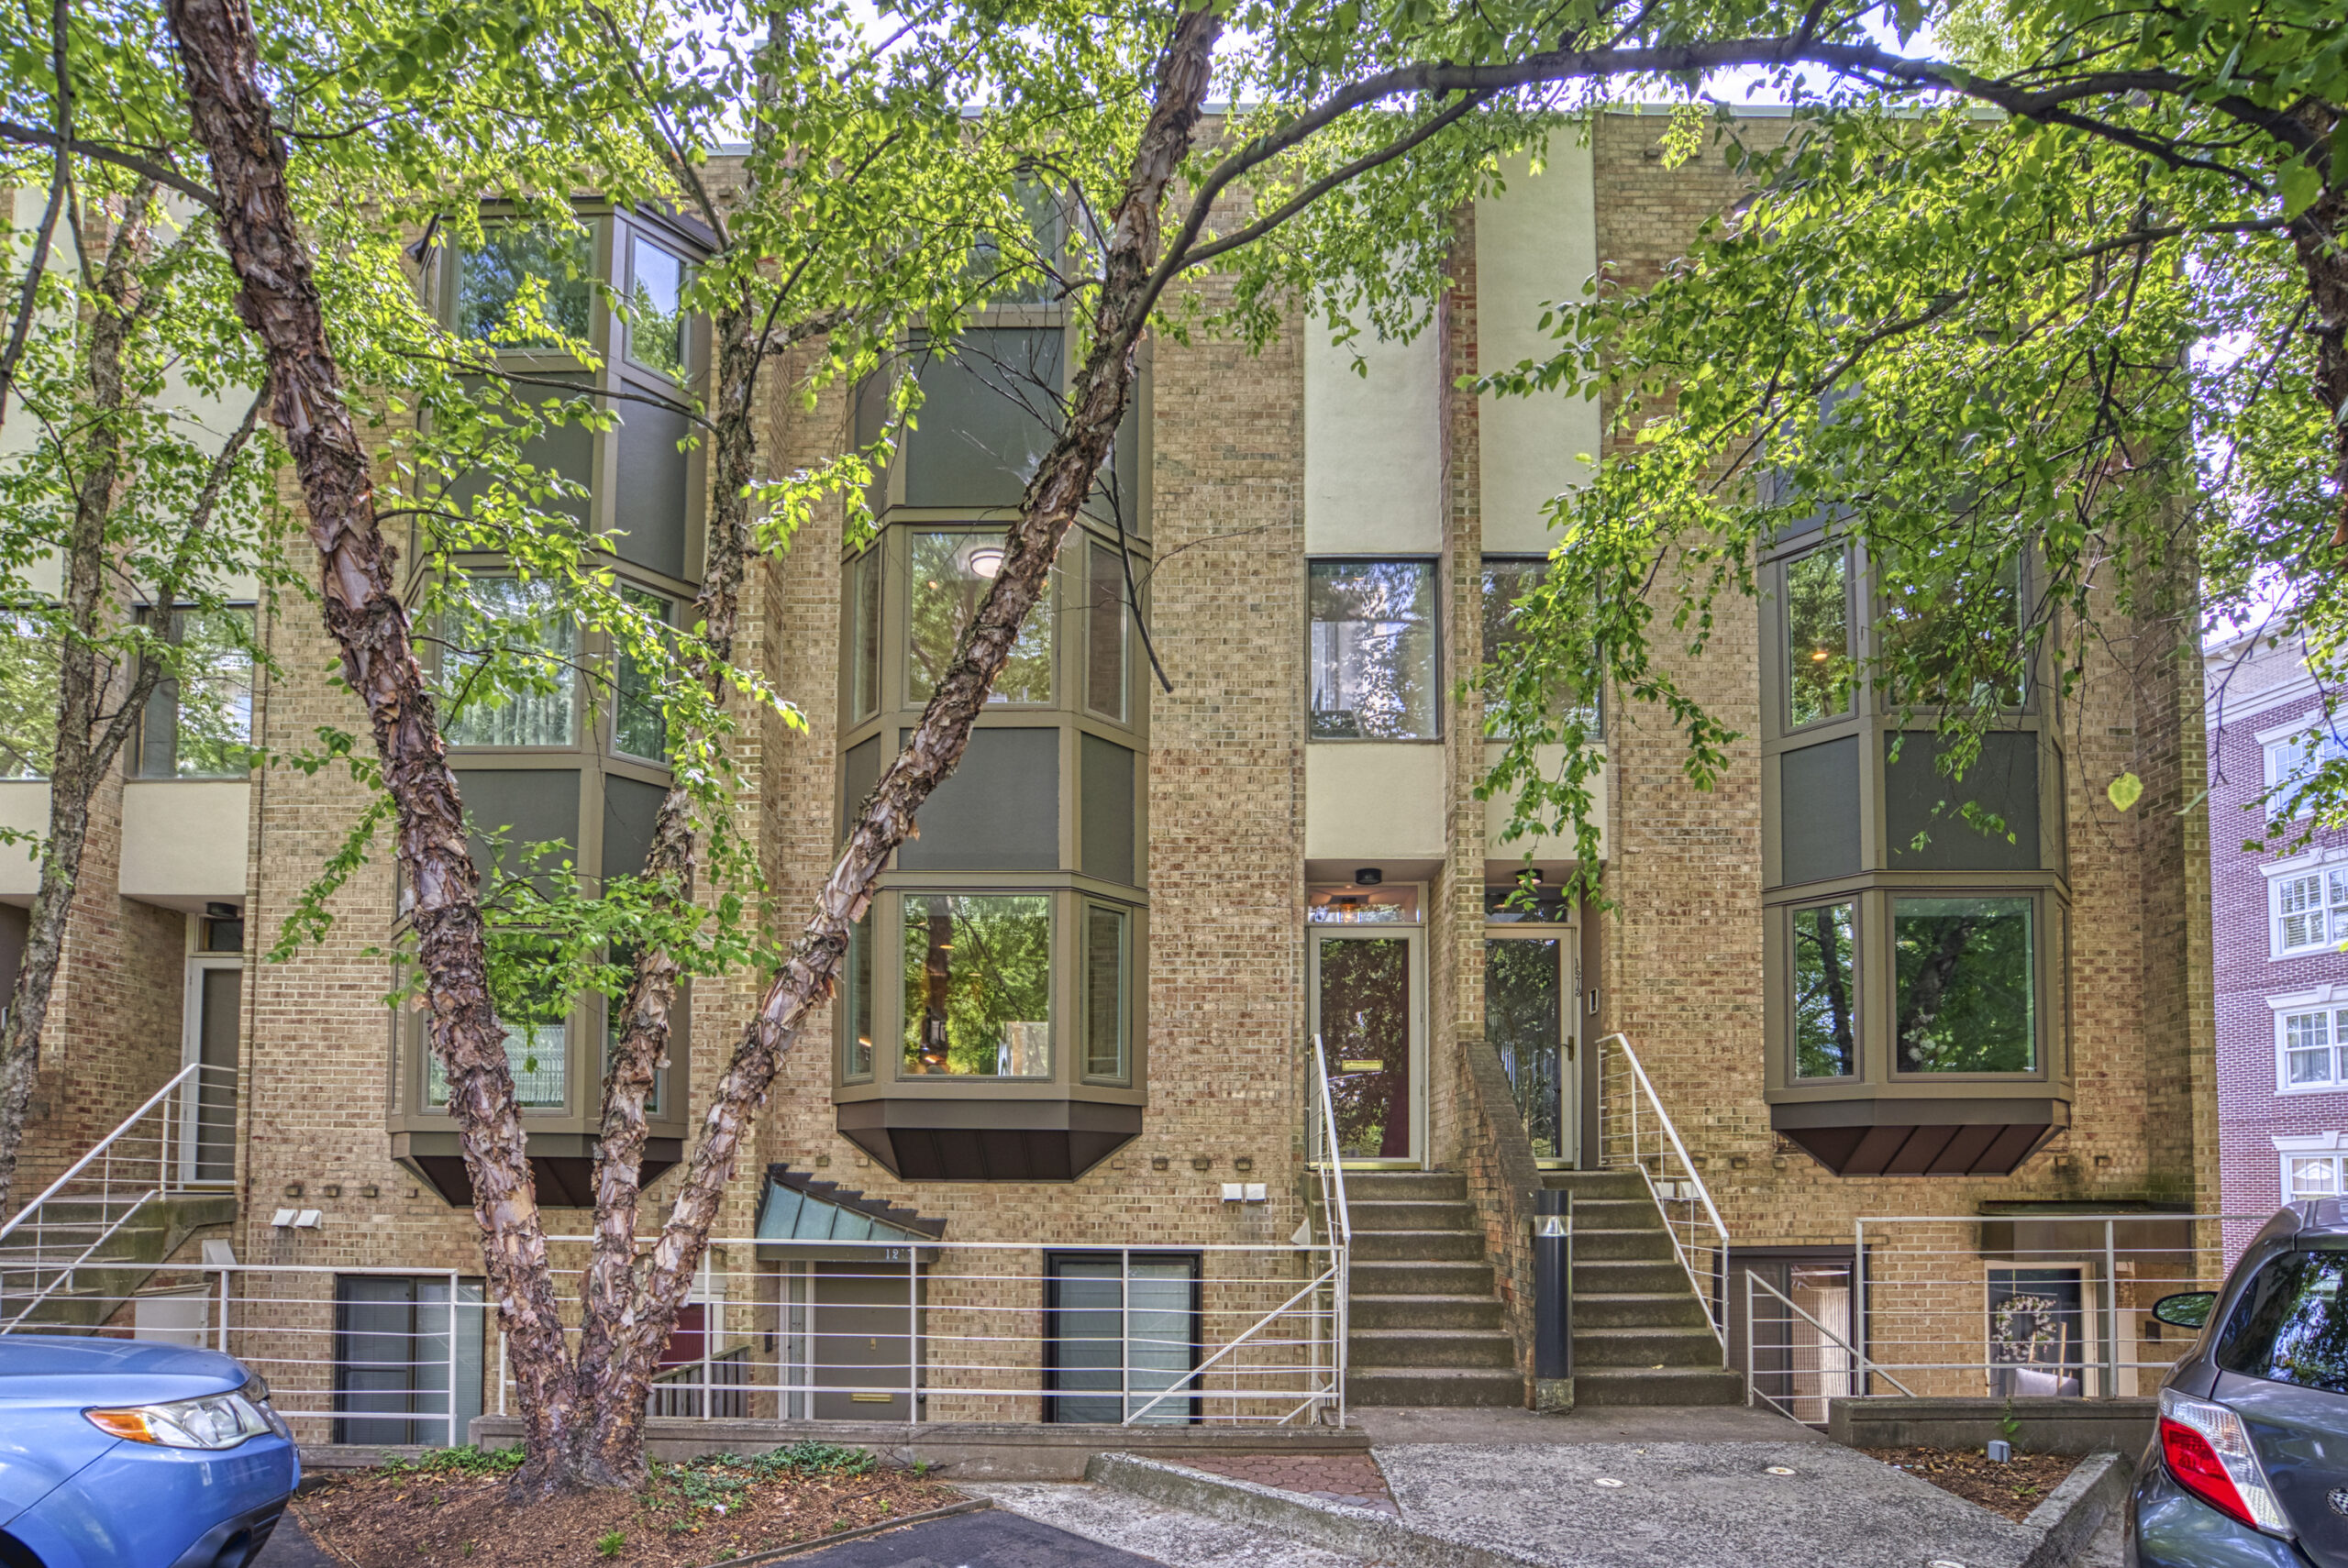 Professional exterior photo of 1215 N Nash St #1, Arlington - showing the street view of a brick brownstone townhome-style condo with stairs leading up to the first floor entrance and down to a ground floor storage unit